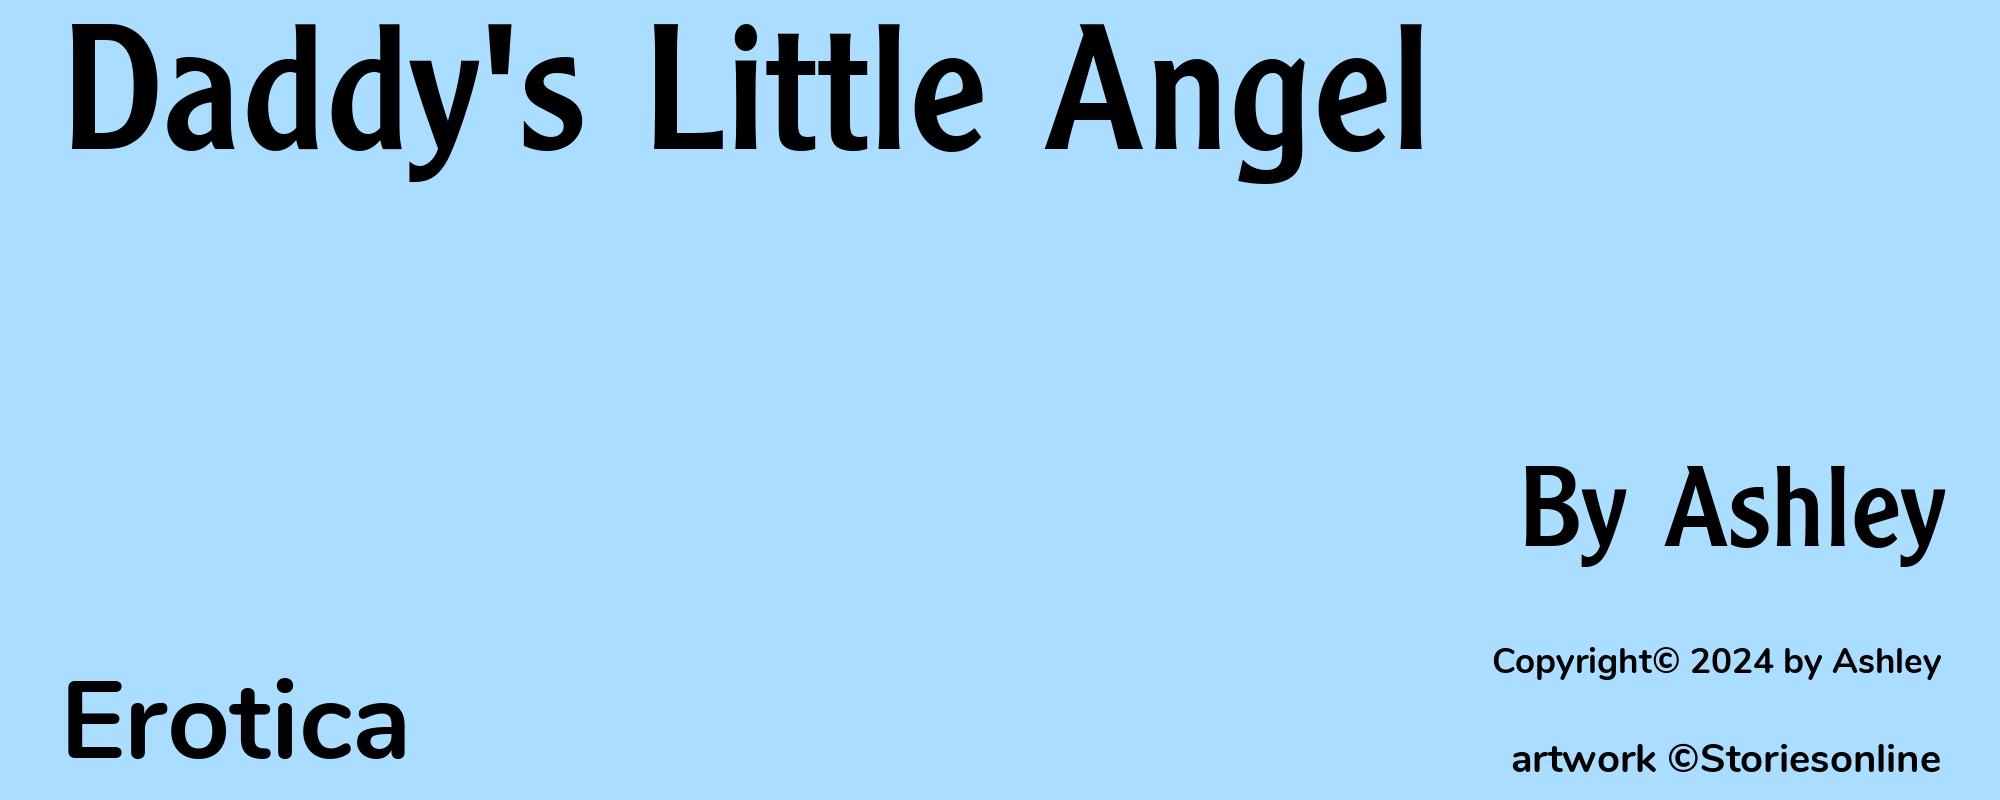 Daddy's Little Angel - Cover